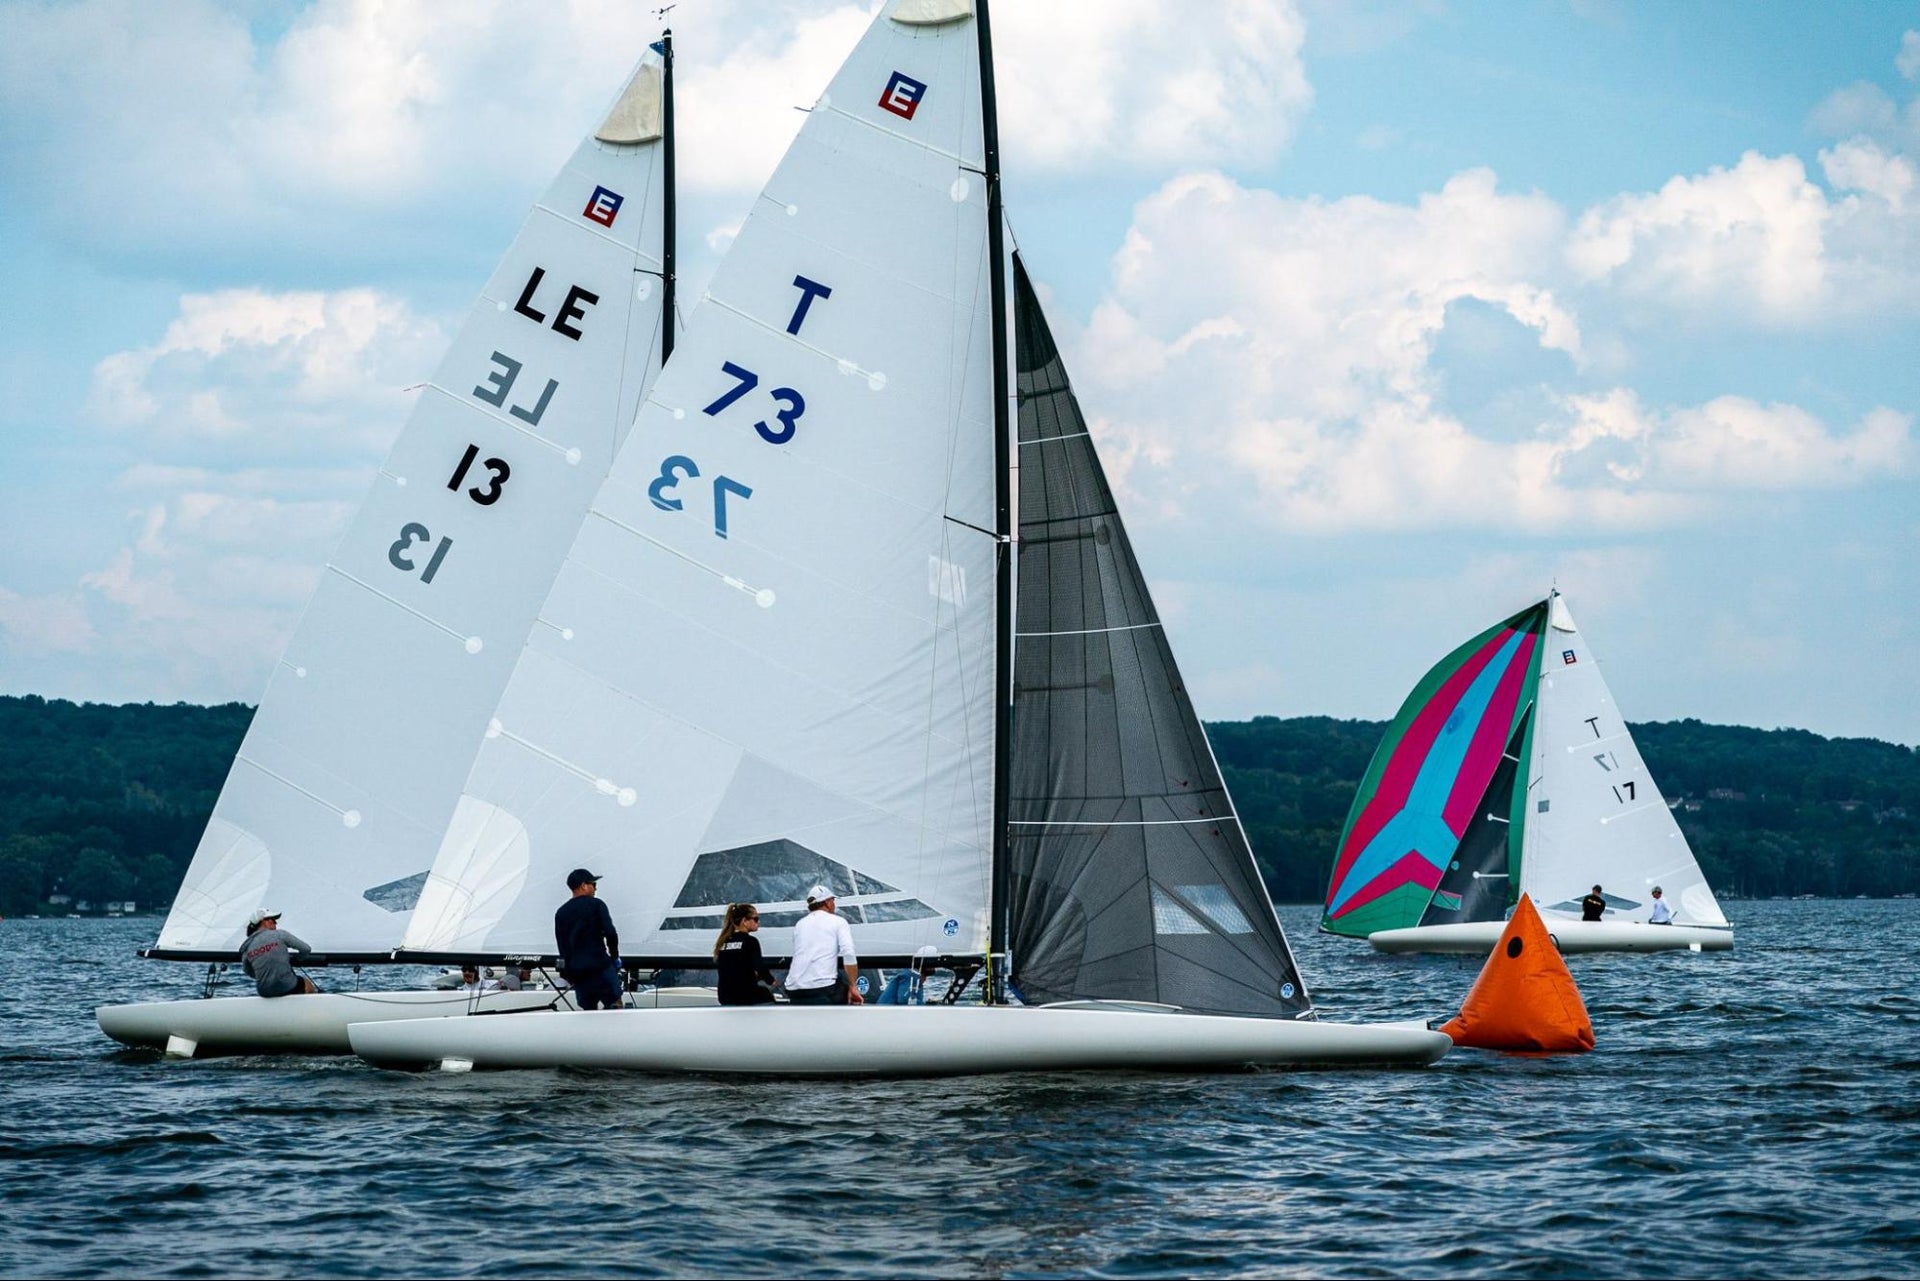 PODIUM SWEEP AT THE E SCOW ECESA CHAMPIONSHIP